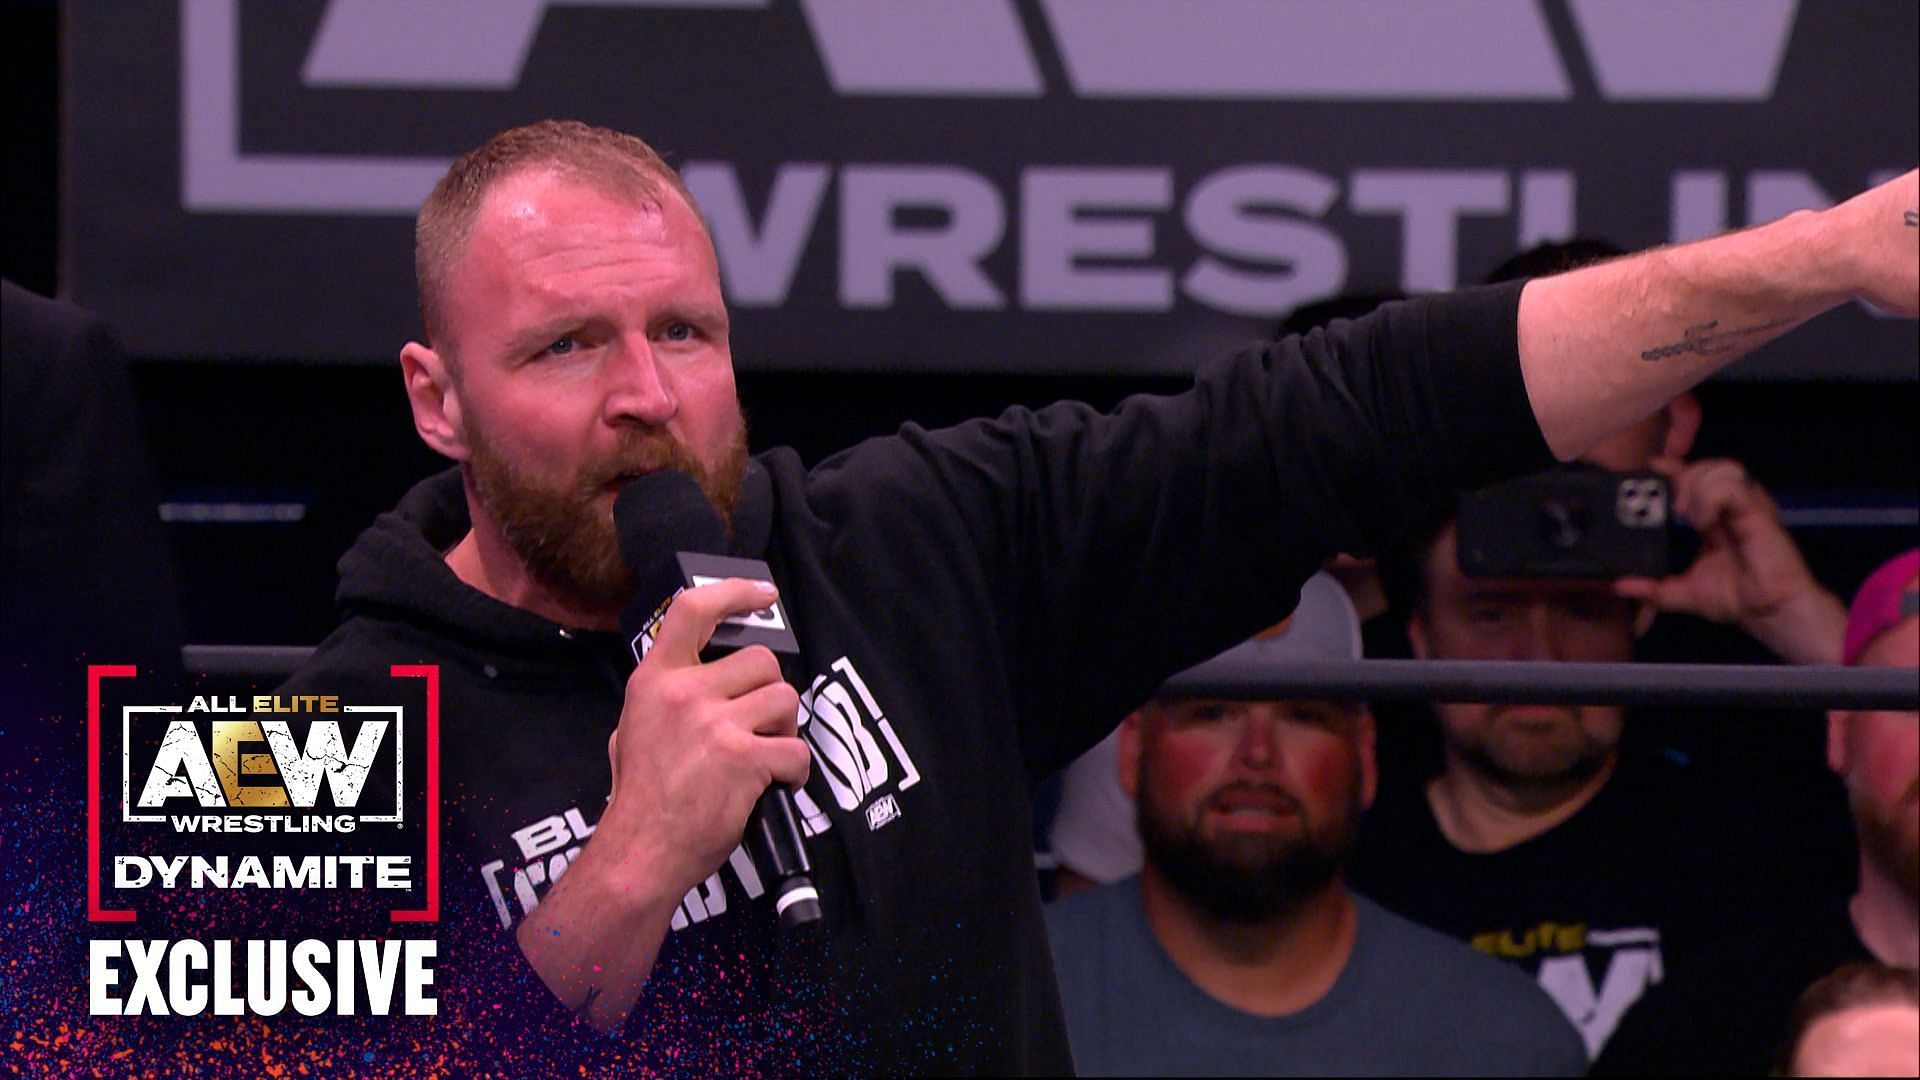 Jon Moxley speaks to the fans at AEW Dynamite.